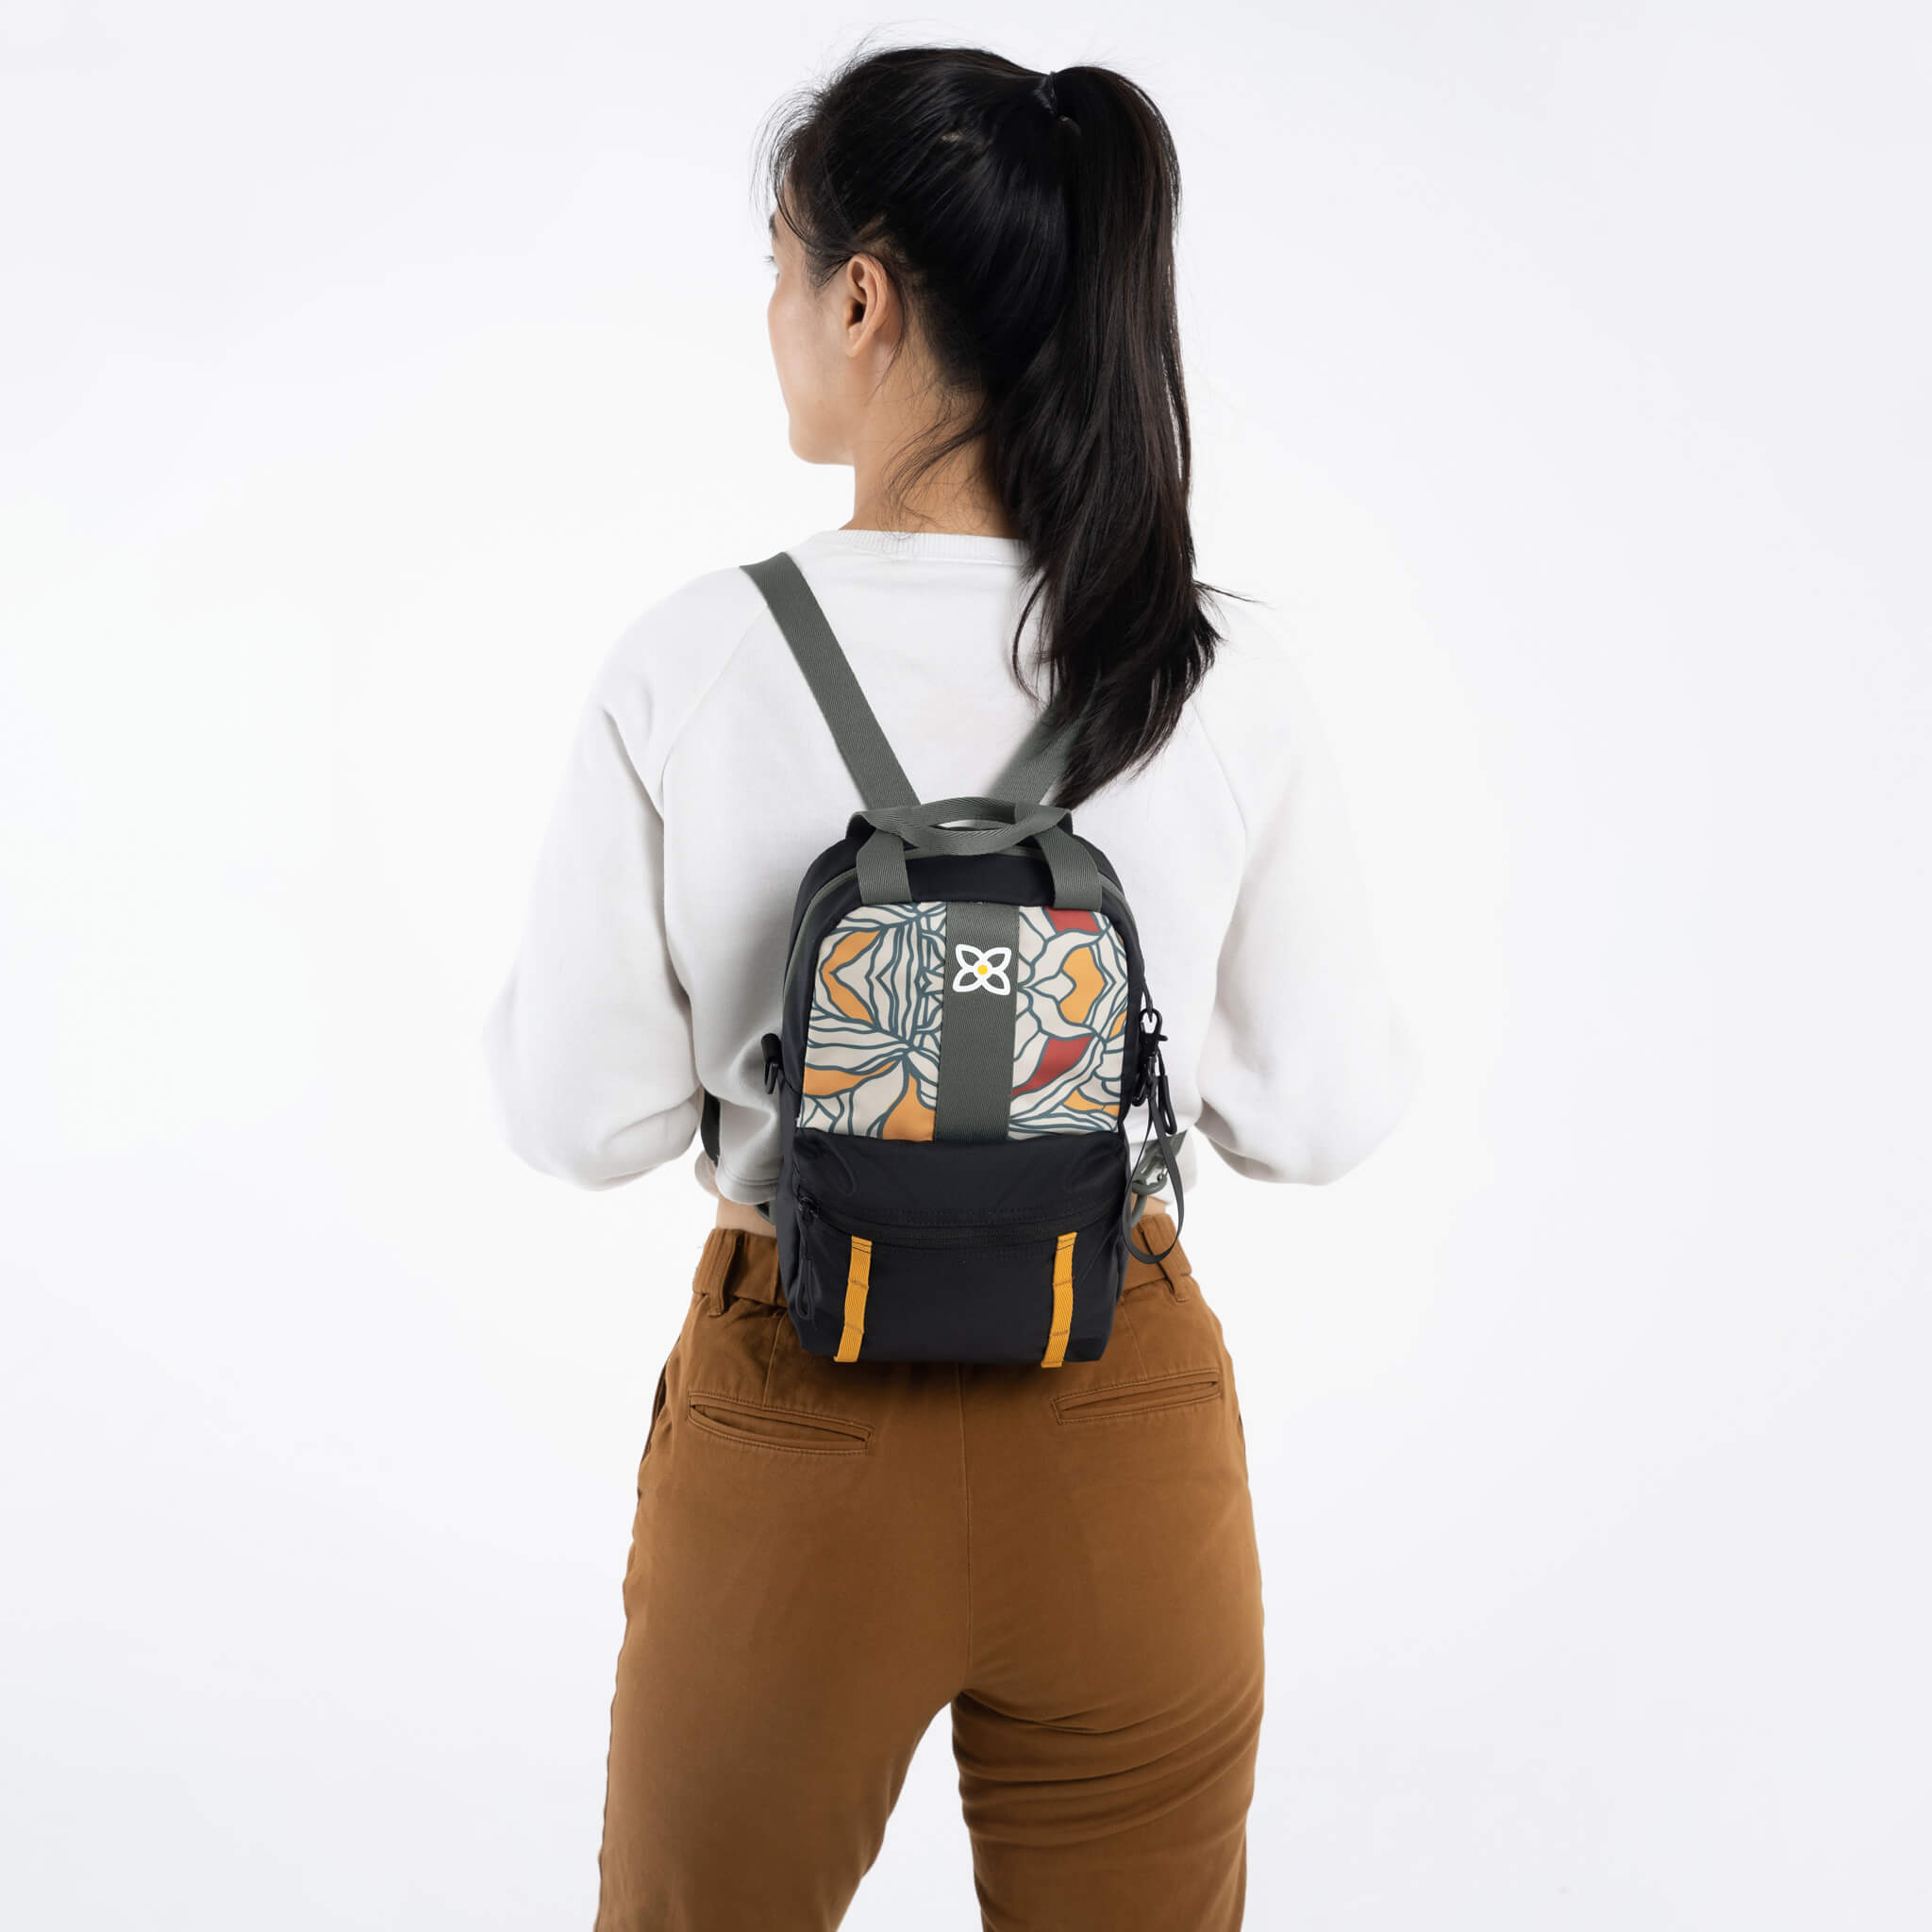 A model facing to the back. She is wearing a white top, brown pants and the Logan mini backpack in Fiori.